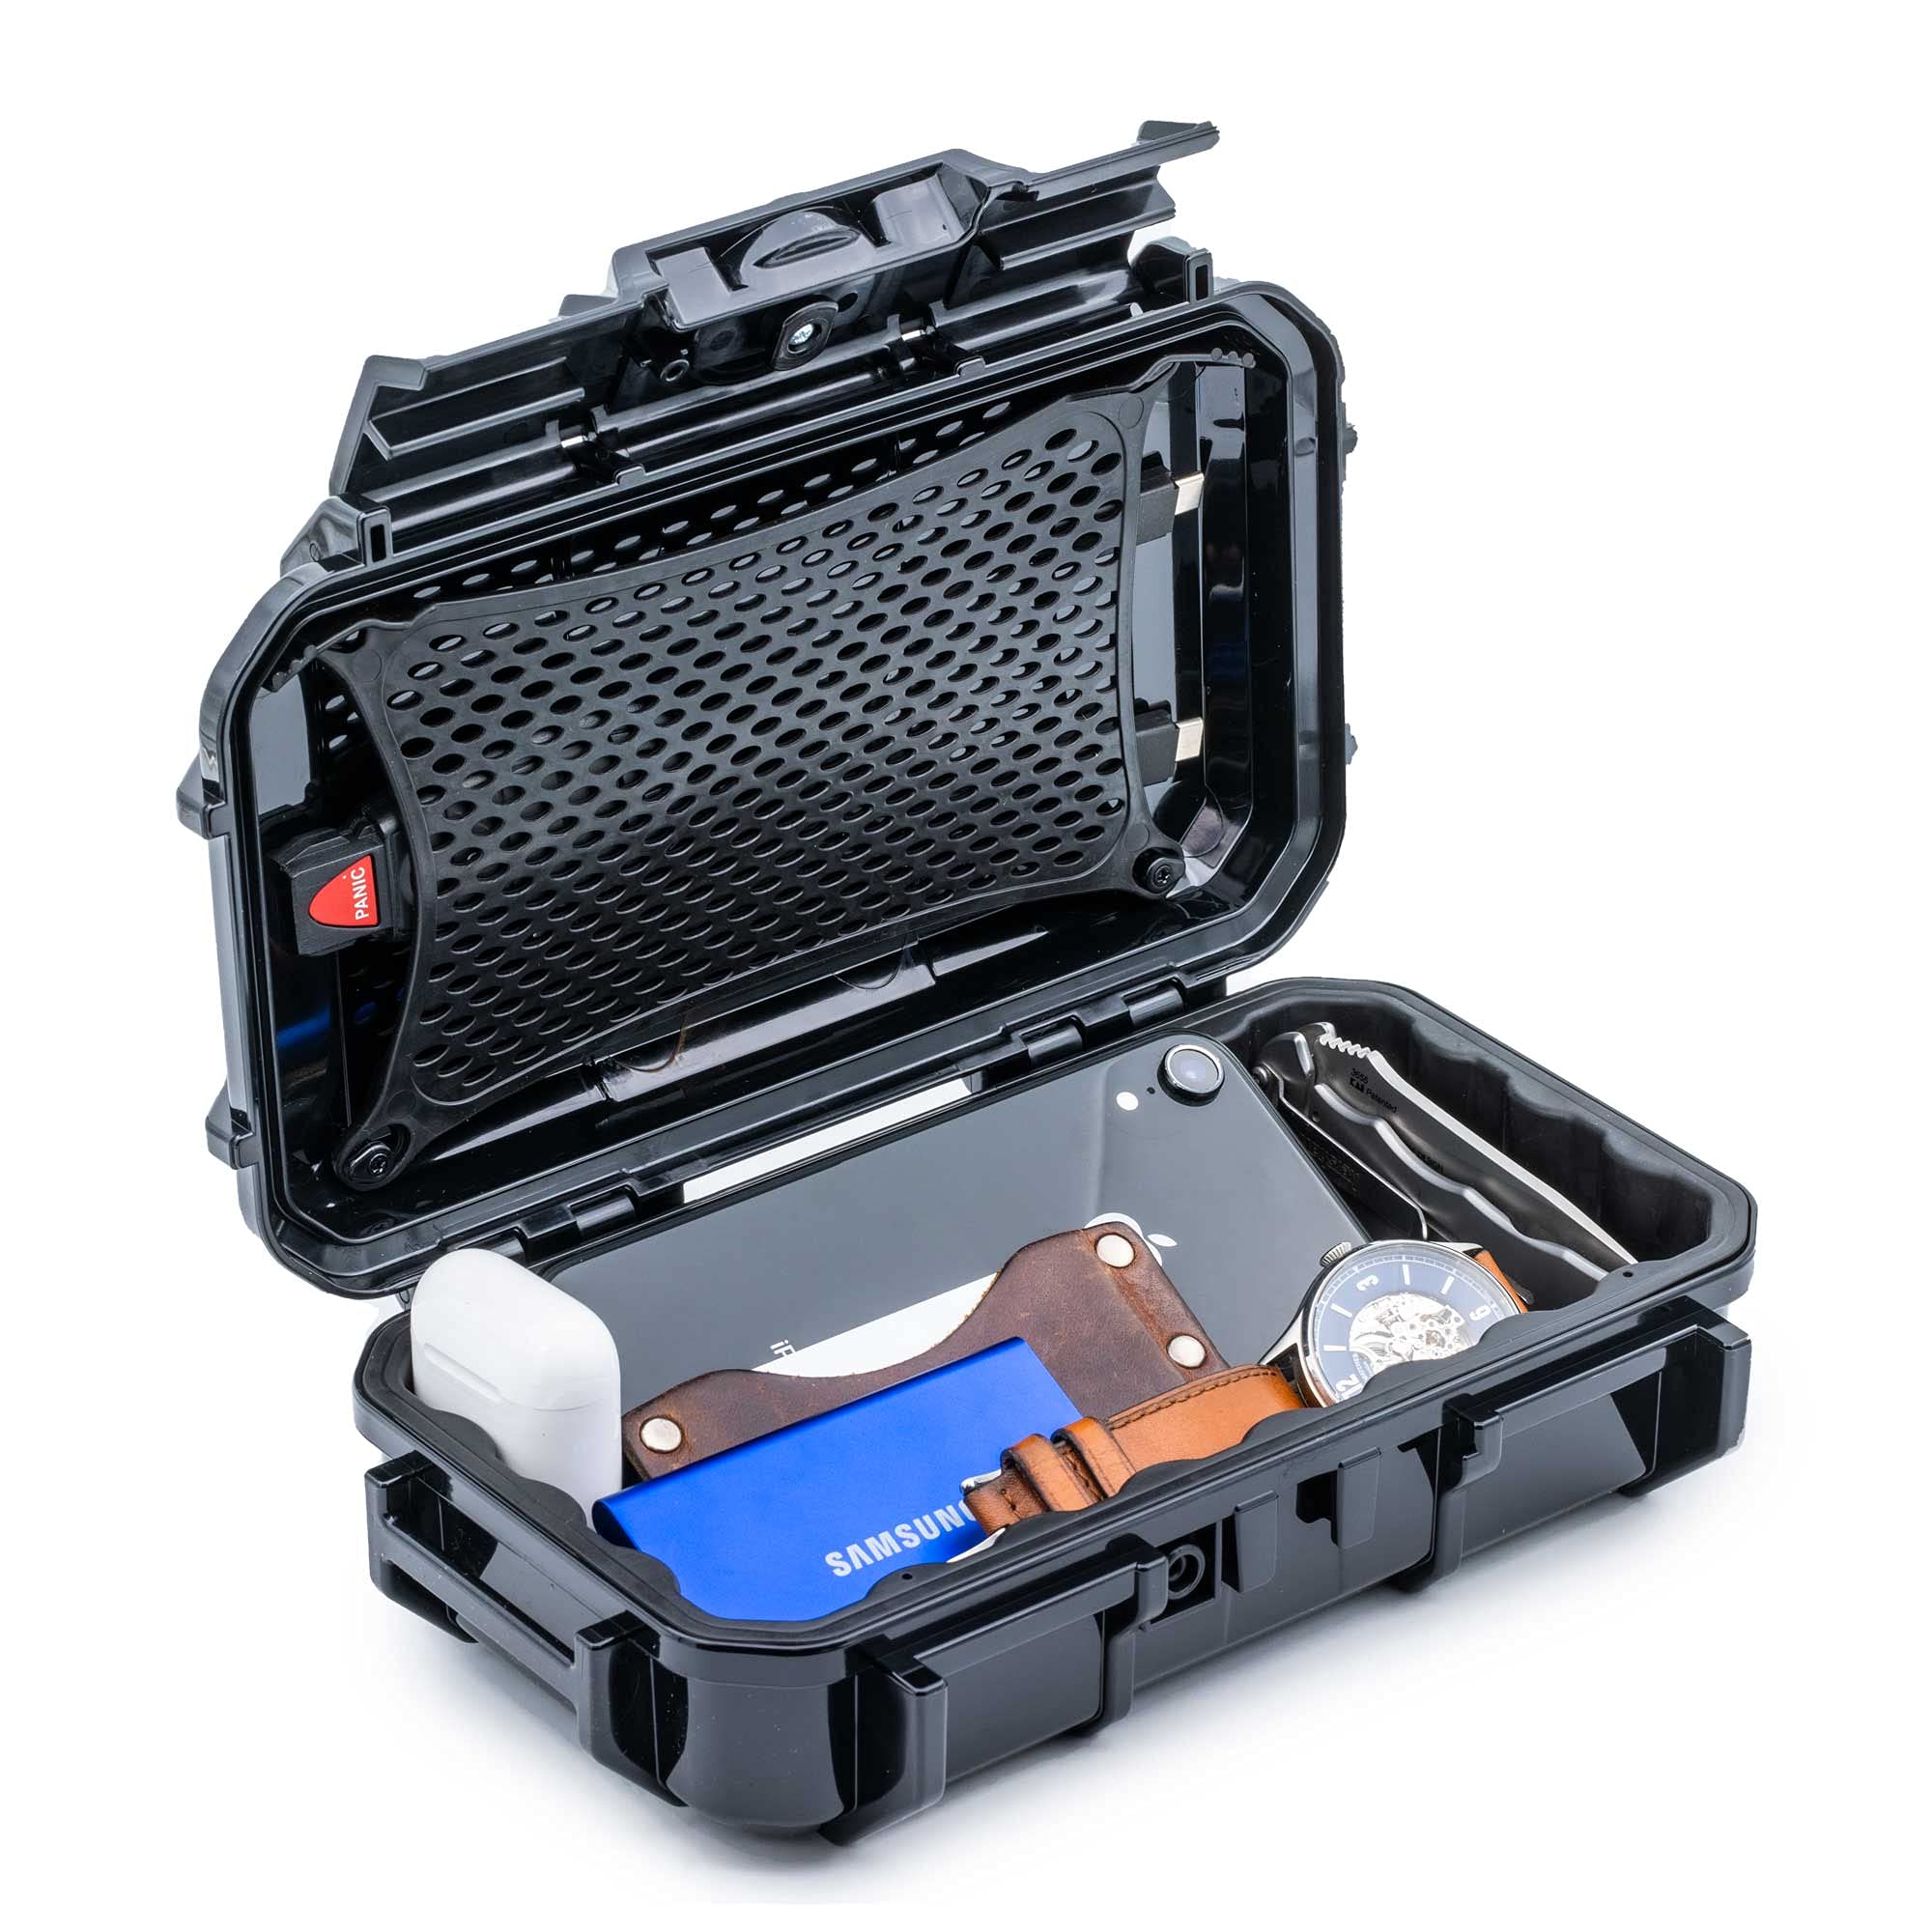 Solid Waterproof ABS Safety Tool Case Box Camping Traveling Storage Case  Vehicle Kit Box Sealed Safety Equipment Case